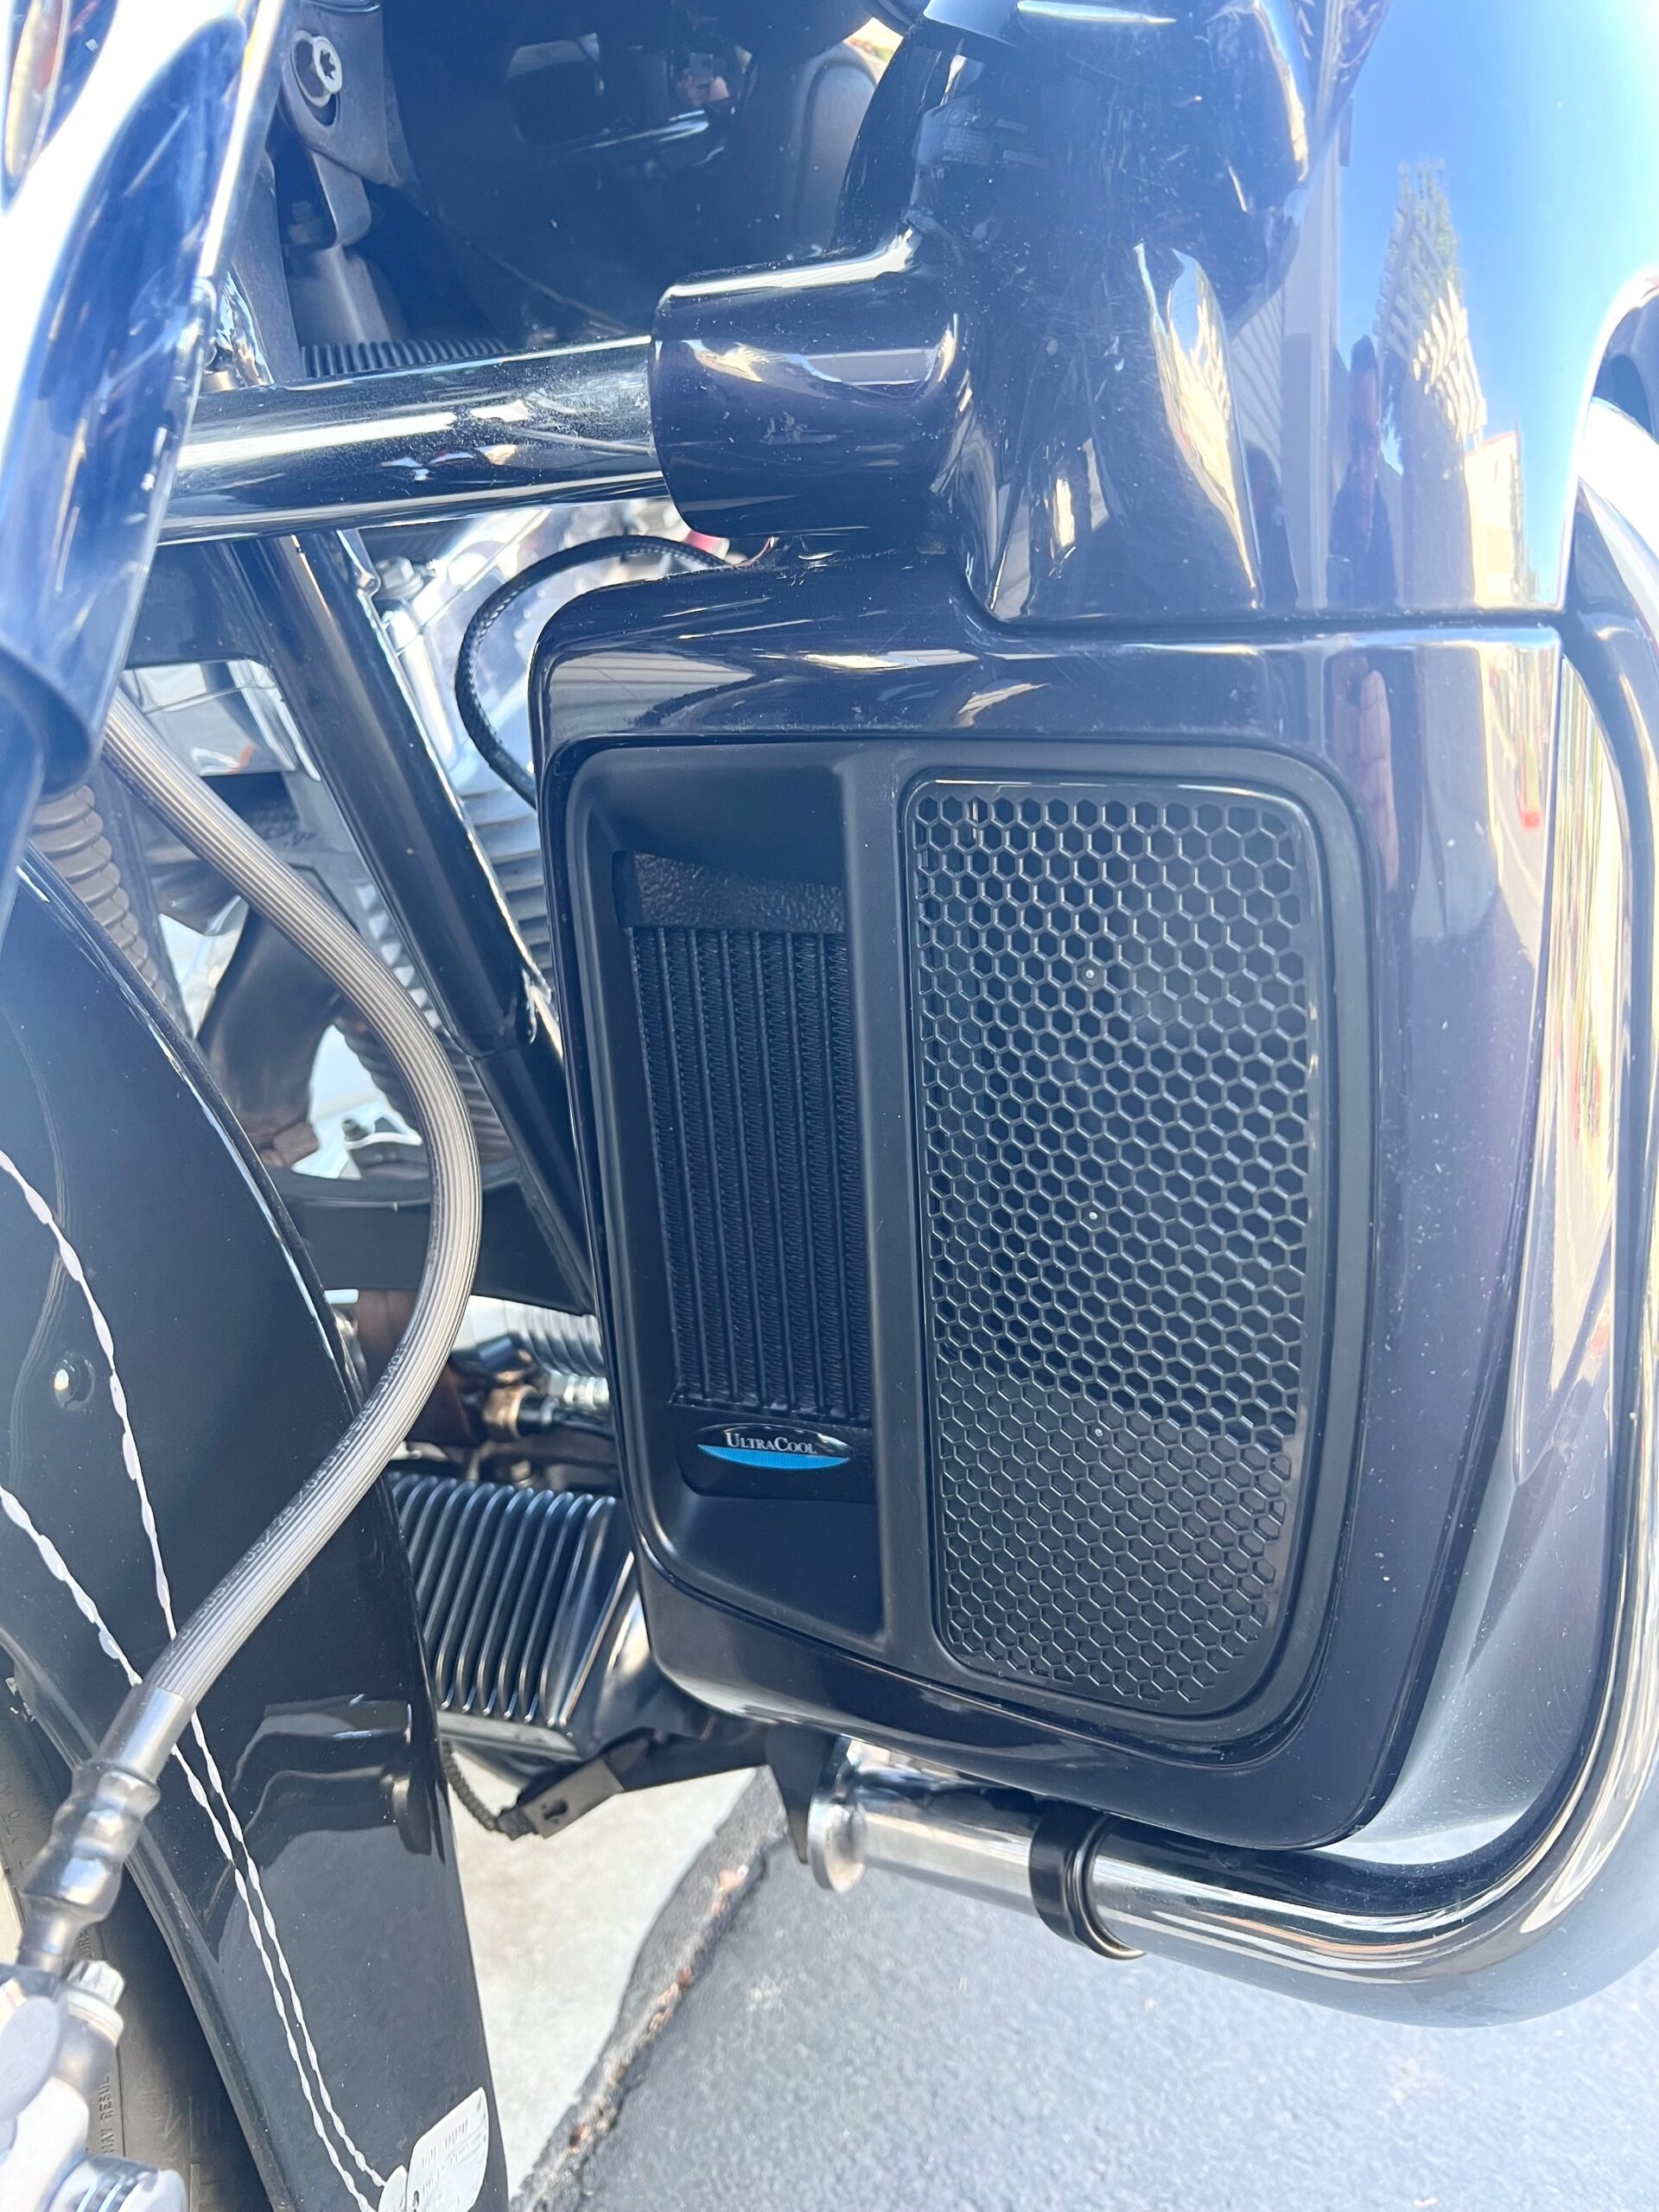 Softail Harley Oil Cooler